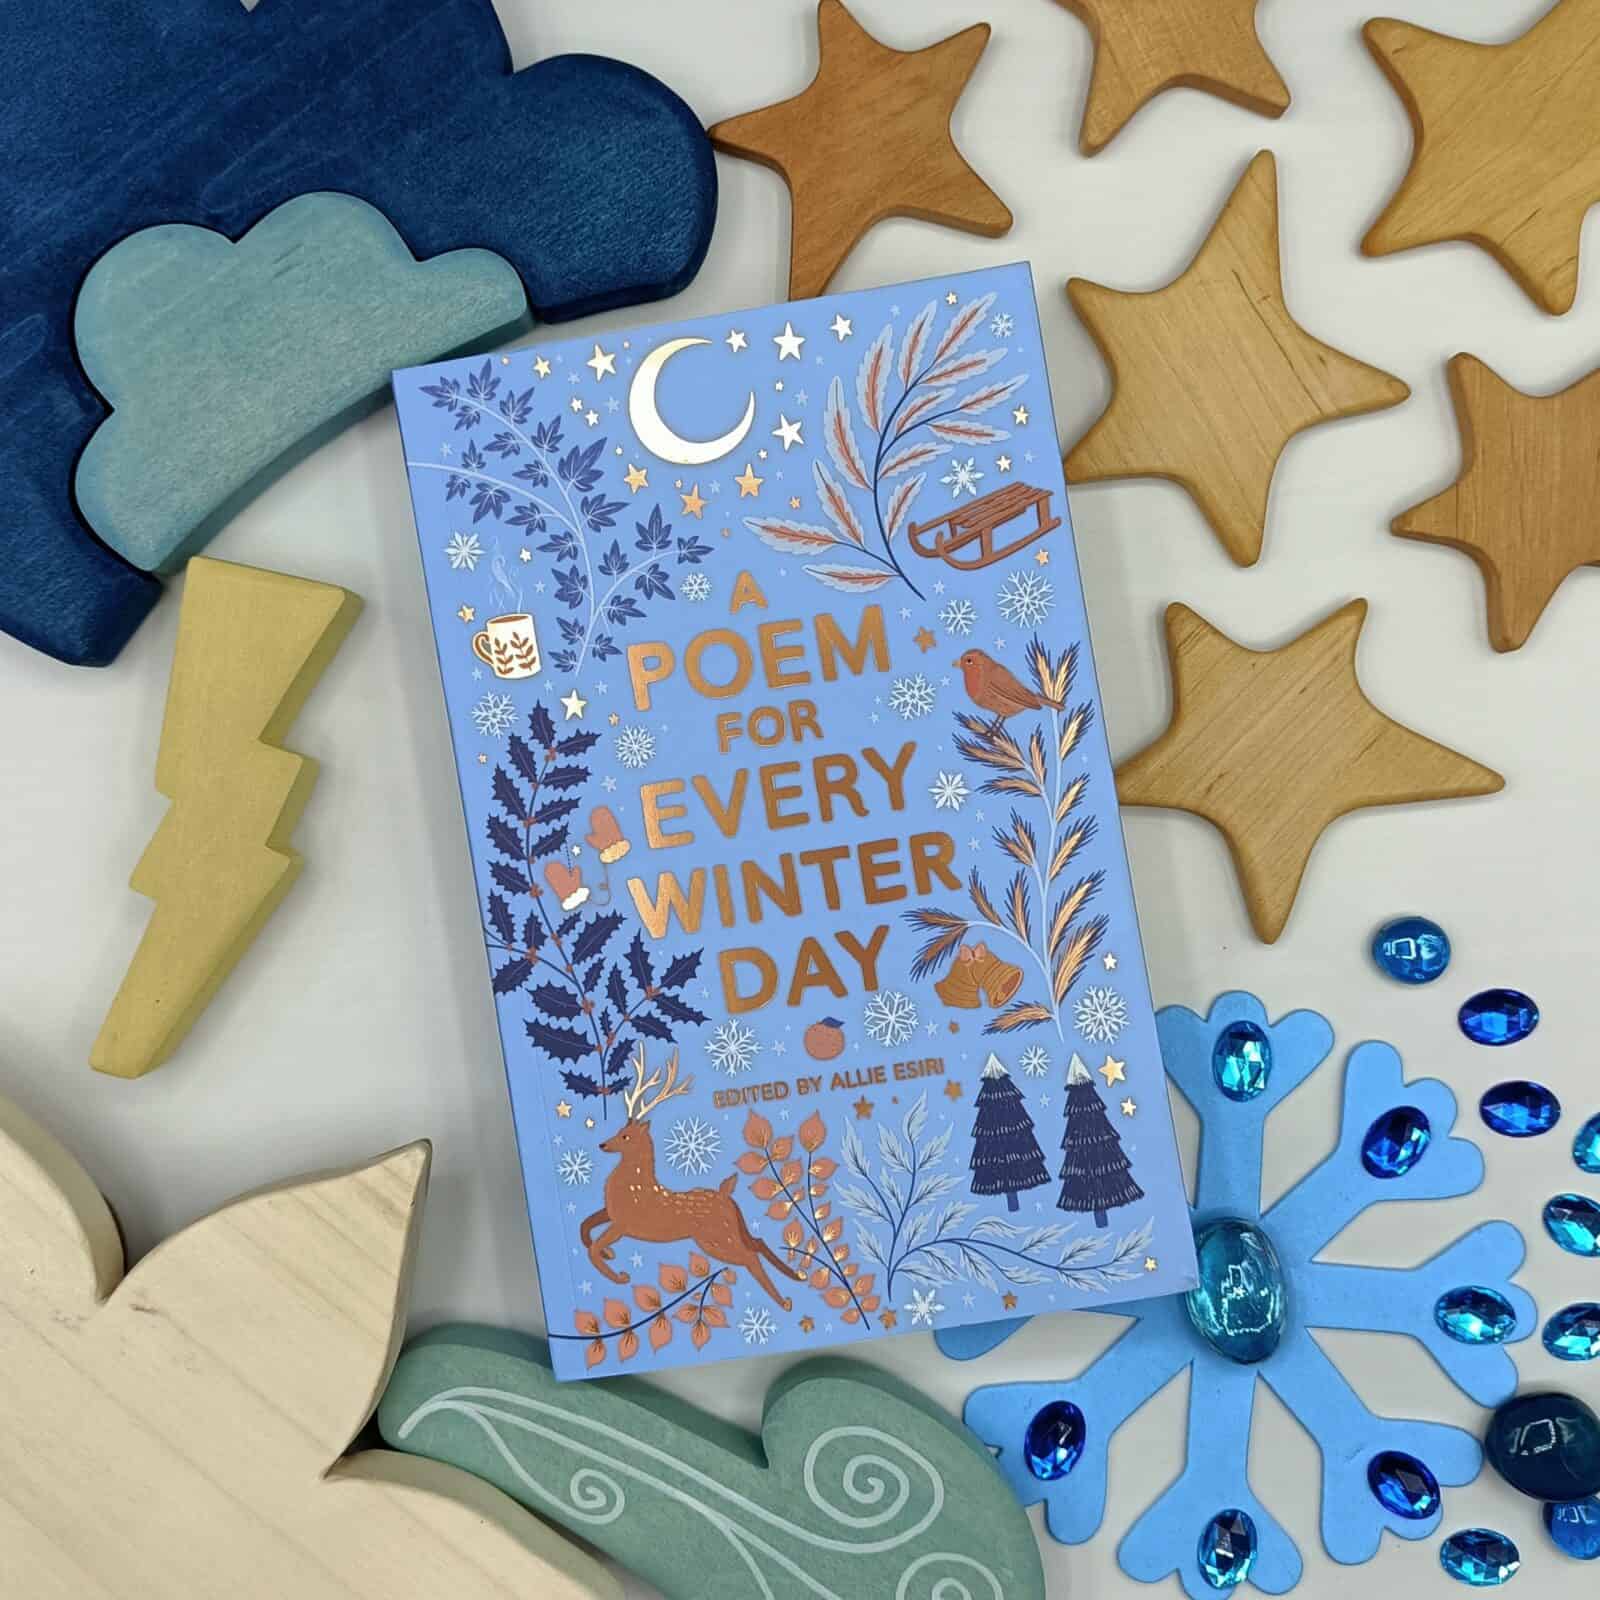 A Poem for Every Day of Winter book placed cover up with wooden weather toys and stars surrounding